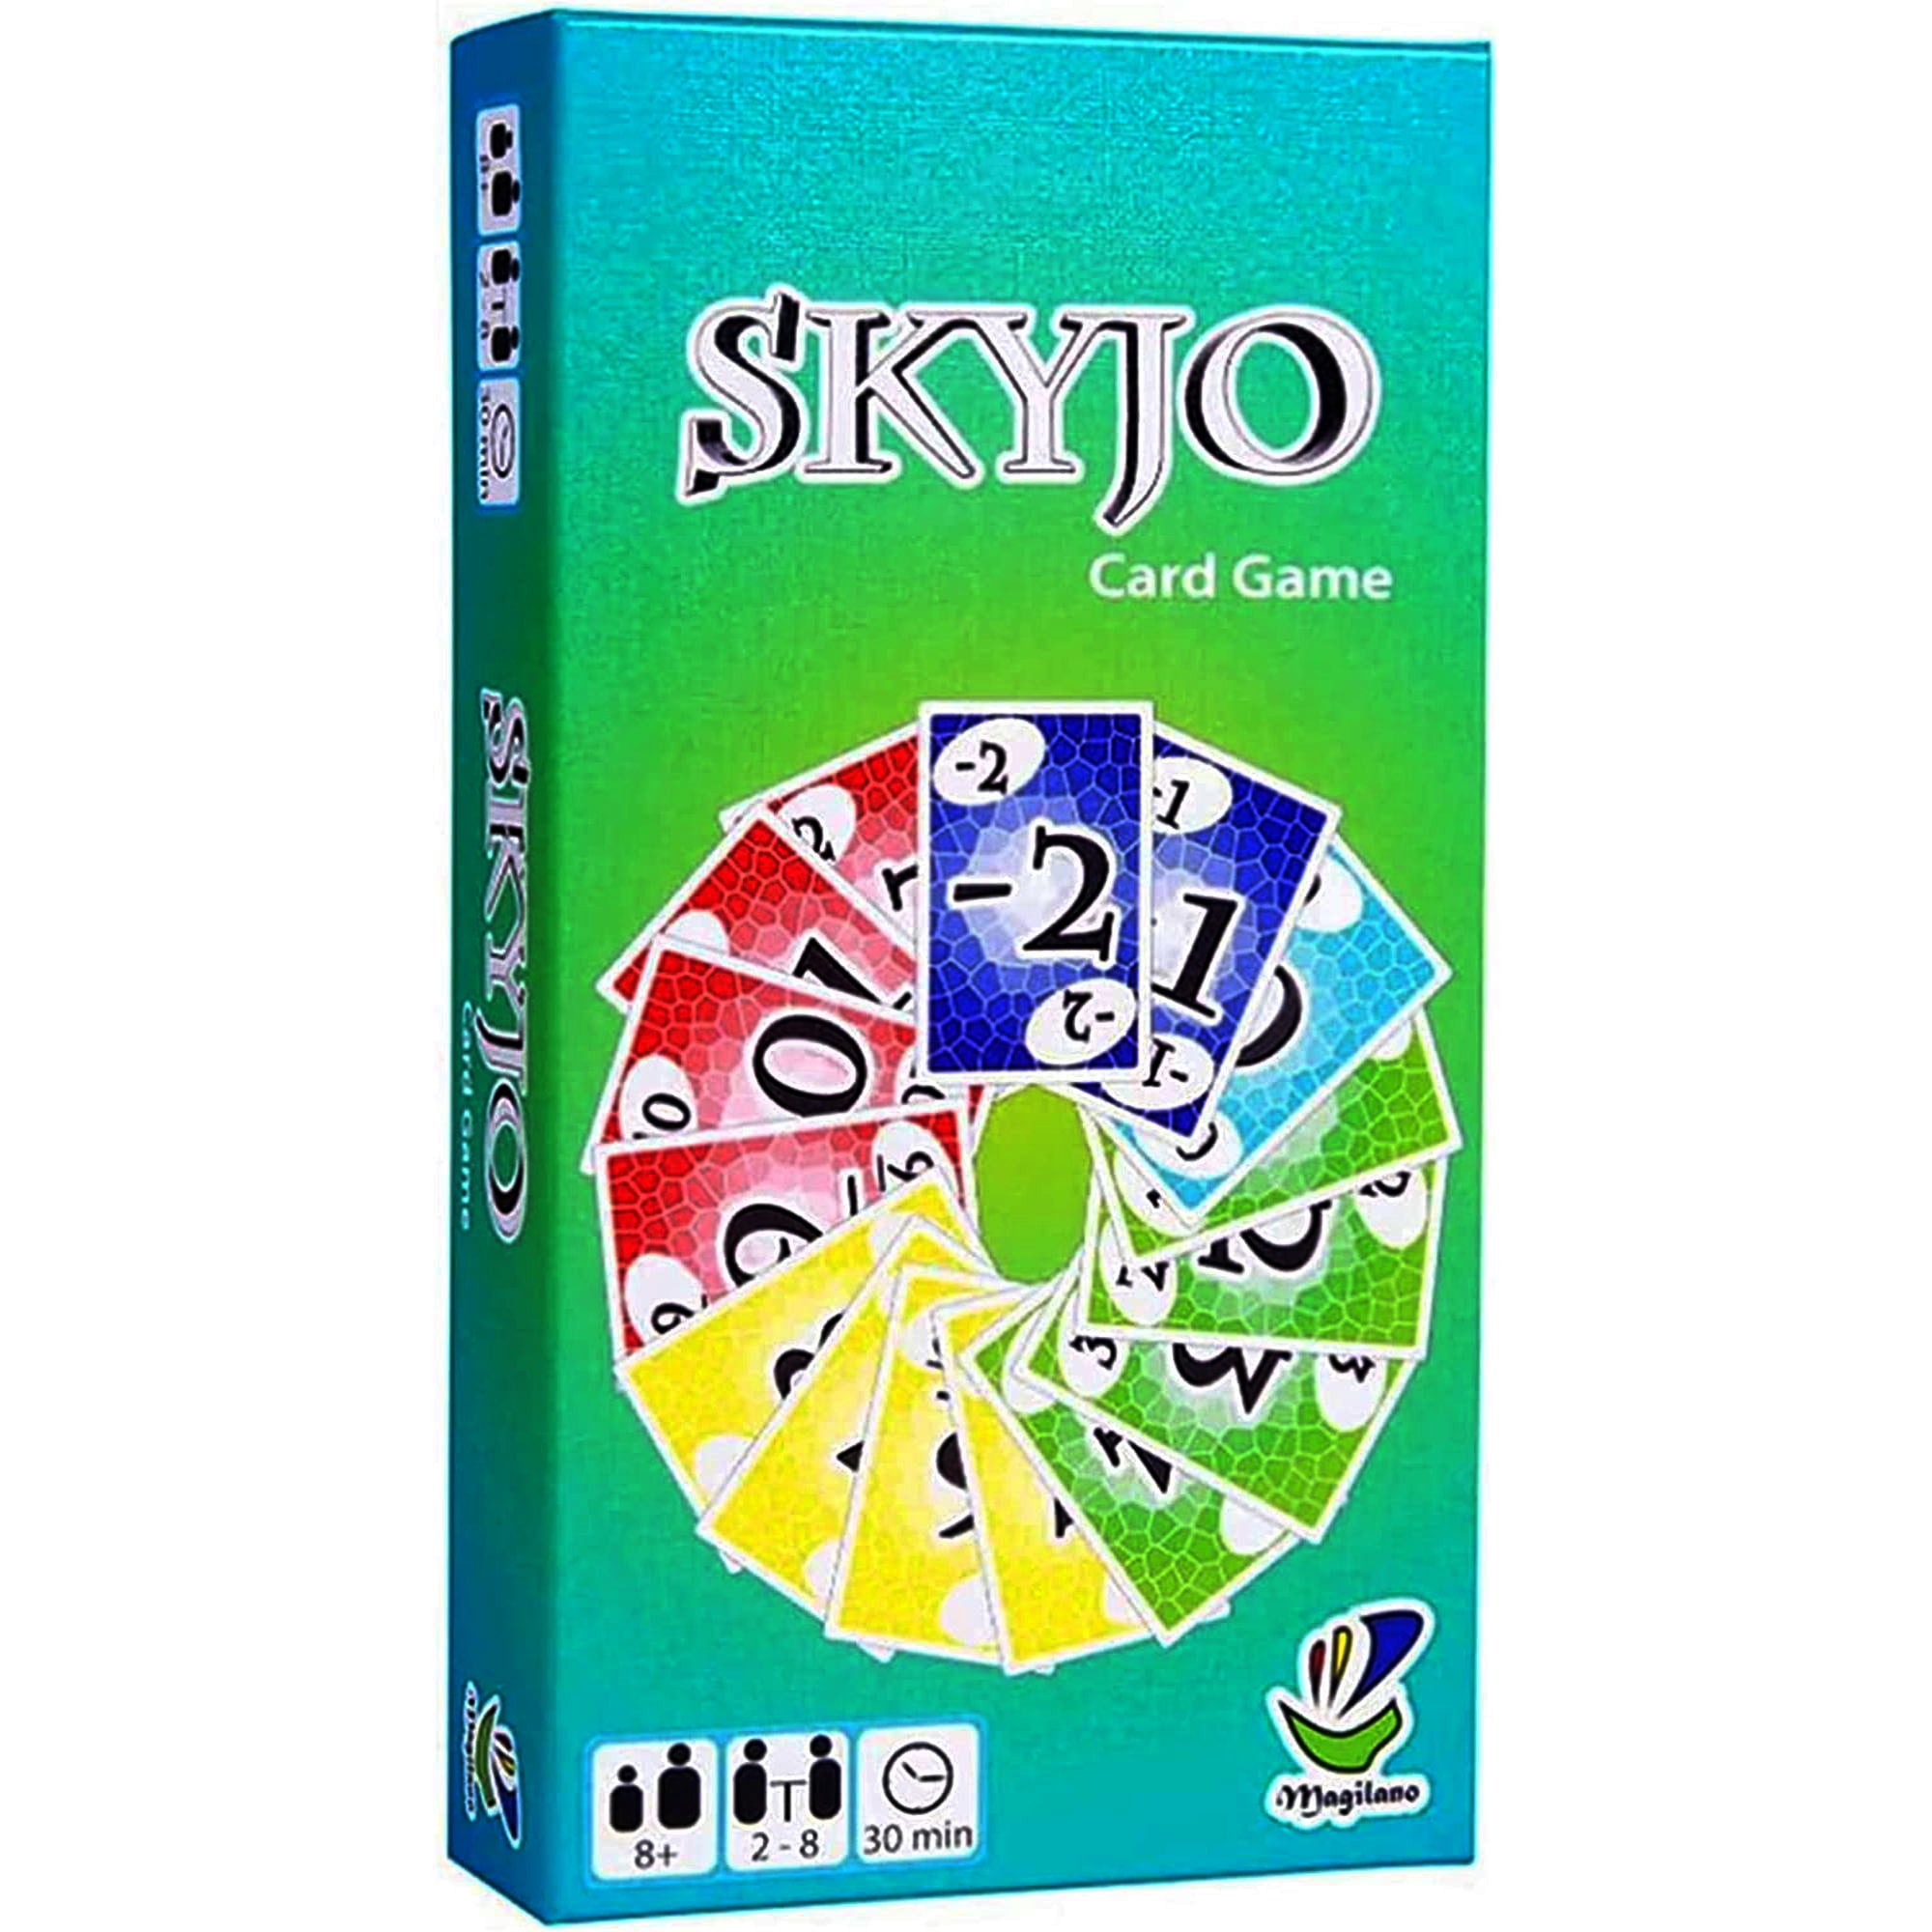 Skyjo Card Game Entertaining Board Game For Kids And Adults, Best